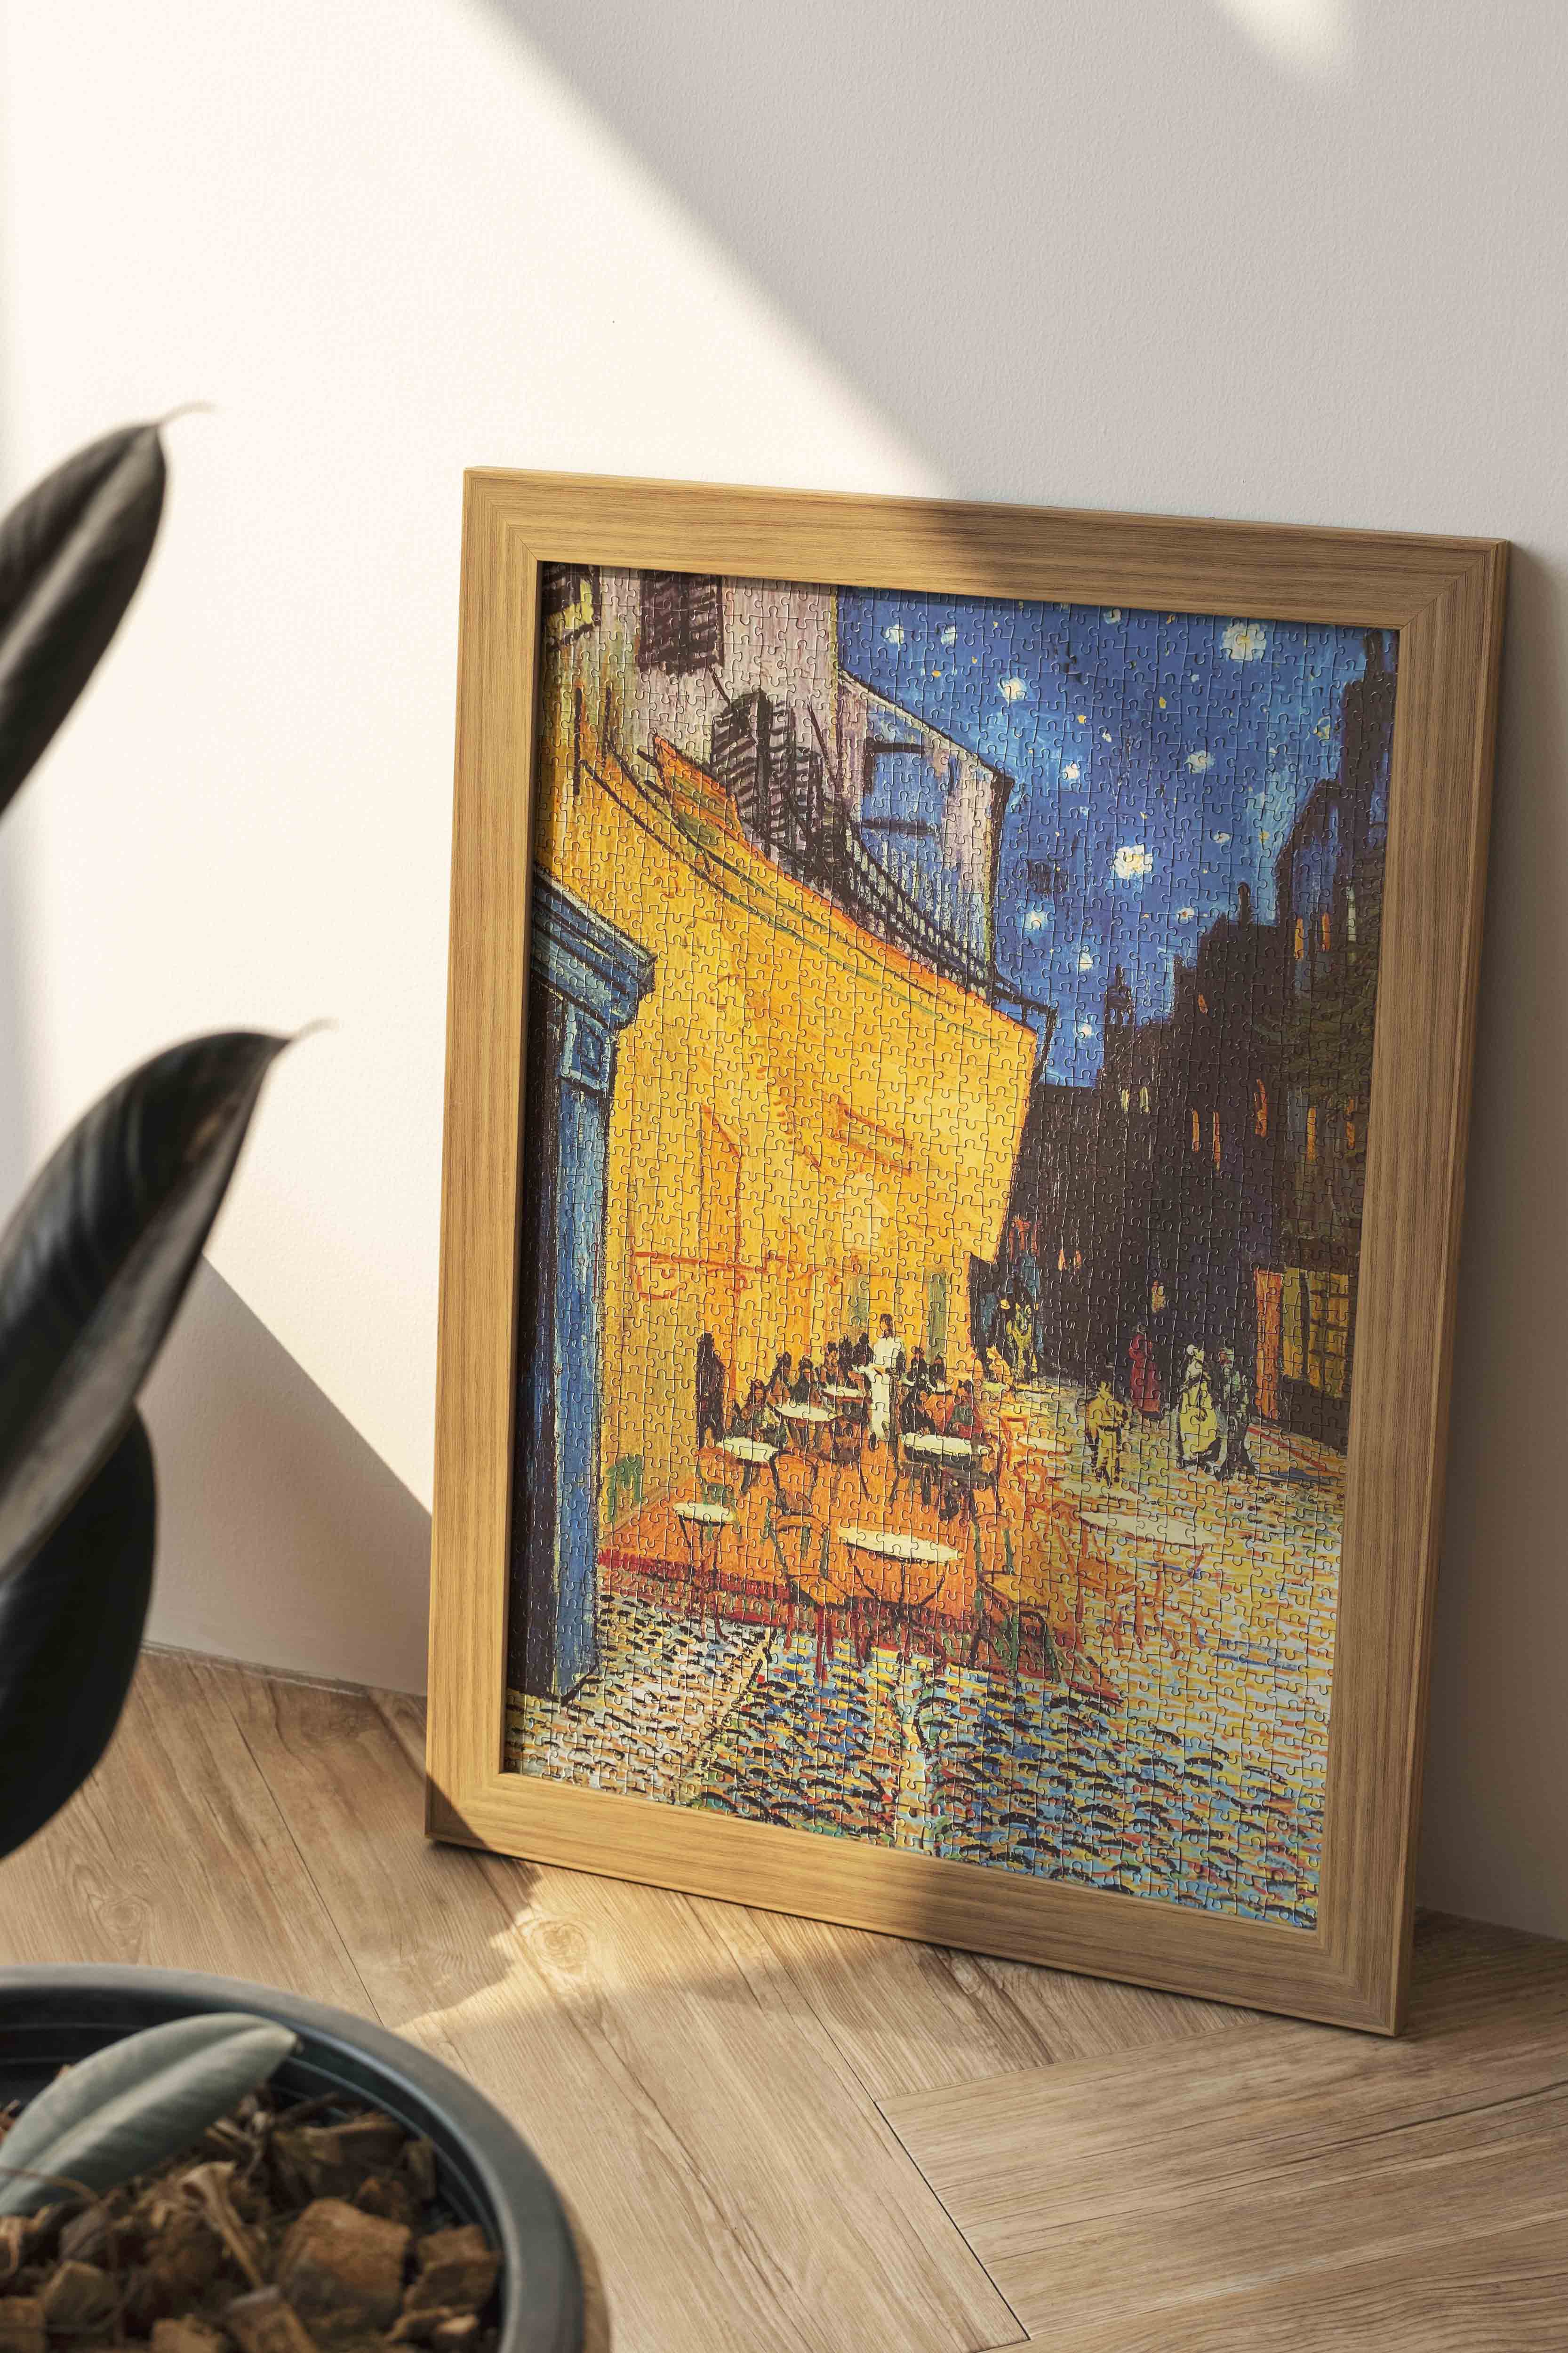 Vincent Van Gogh's Café Terrace at Night Jigsaw Puzzle: A 1000-piece puzzle of the iconic painting. Perfect for art and puzzle enthusiasts.